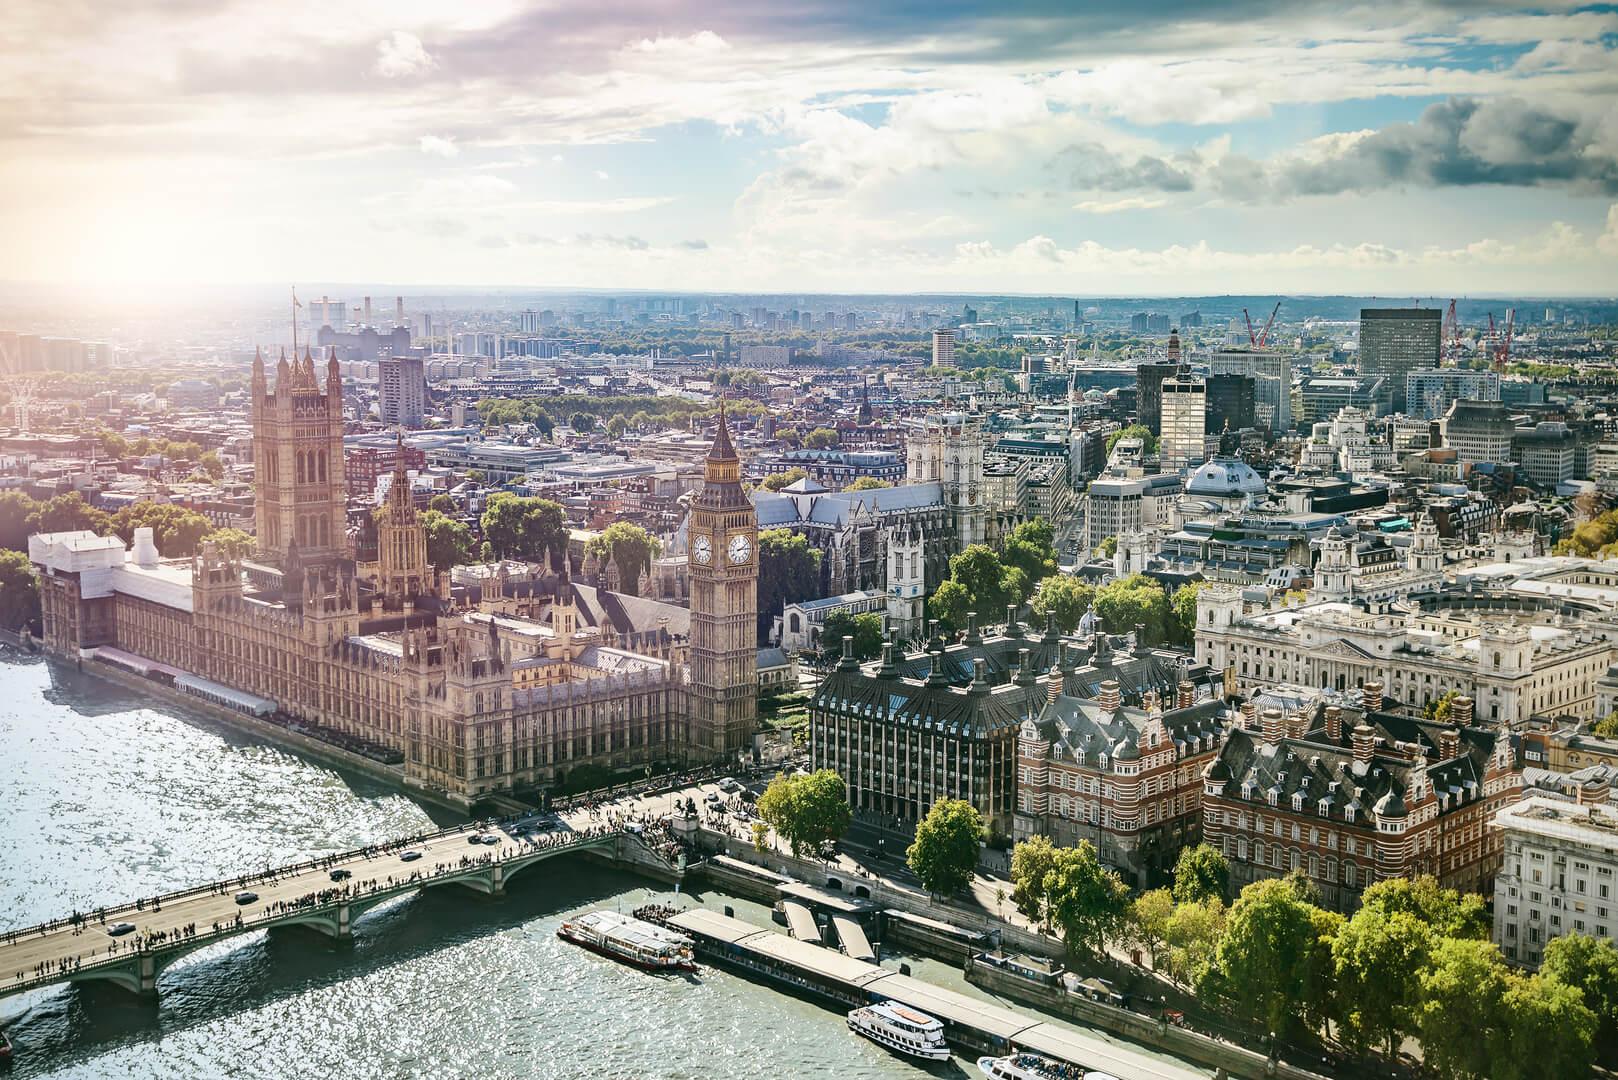 Aerial view of Big Ben, Parliament Building and Westminster Bridge on River Thames, with lens flare, London, UK, Europe